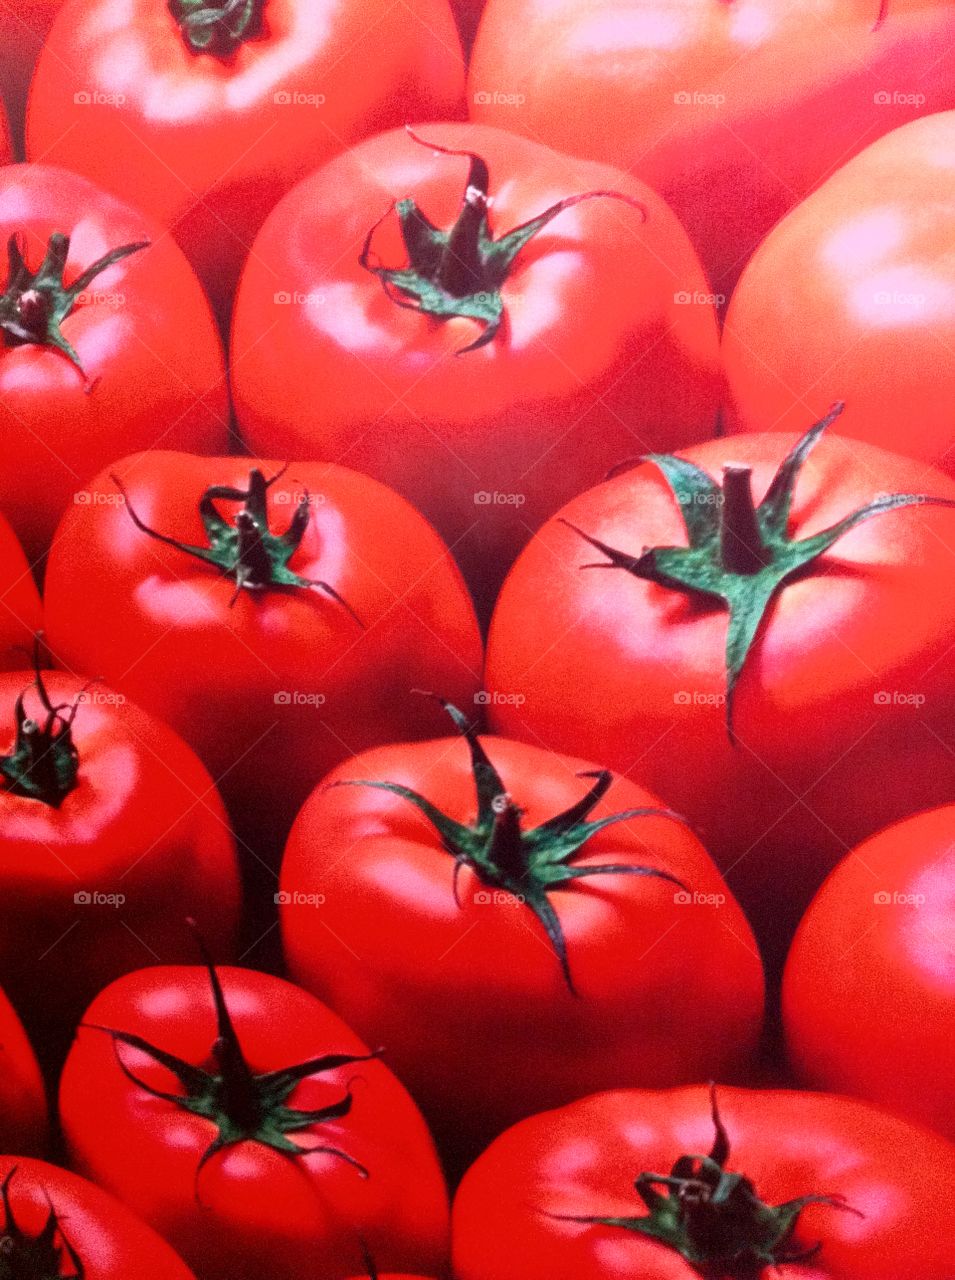 Tomatoes. There is no story behind